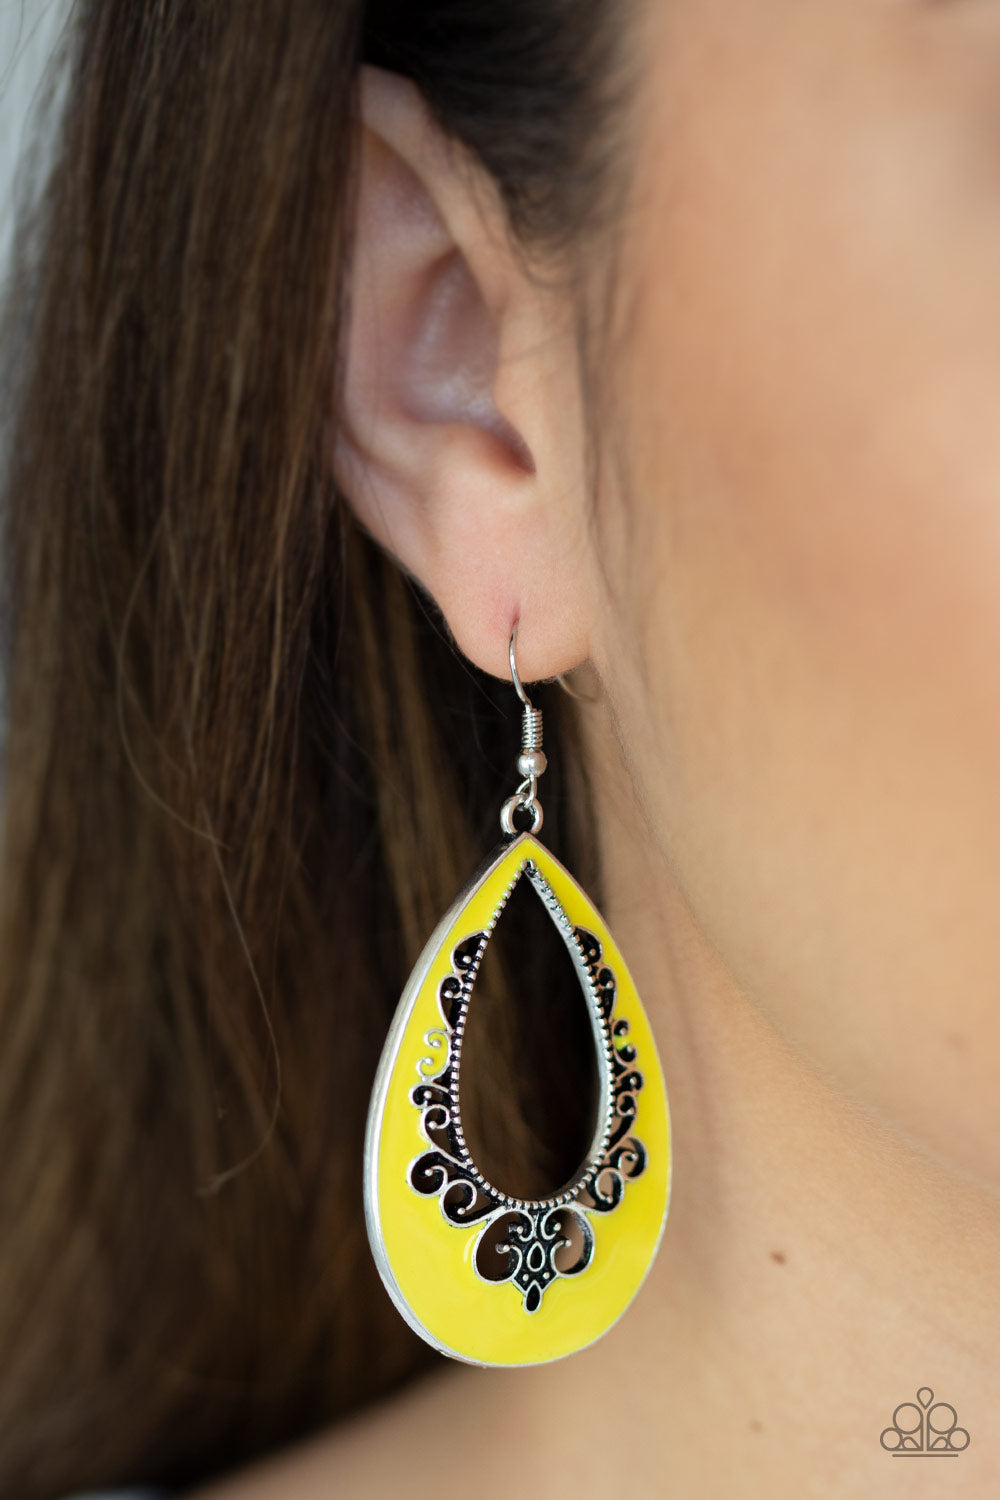 Compliments To The CHIC - Yellow Item #JJG-E302 Painted in a shiny yellow finish, an airy silver teardrop swings from the ear in a whimsical fashion. The colorful frame features cutout filigree patterns for a seasonal flair. Earring attaches to a standard fishhook fitting. All Paparazzi Accessories are lead free and nickel free!  Sold as one pair of earrings.